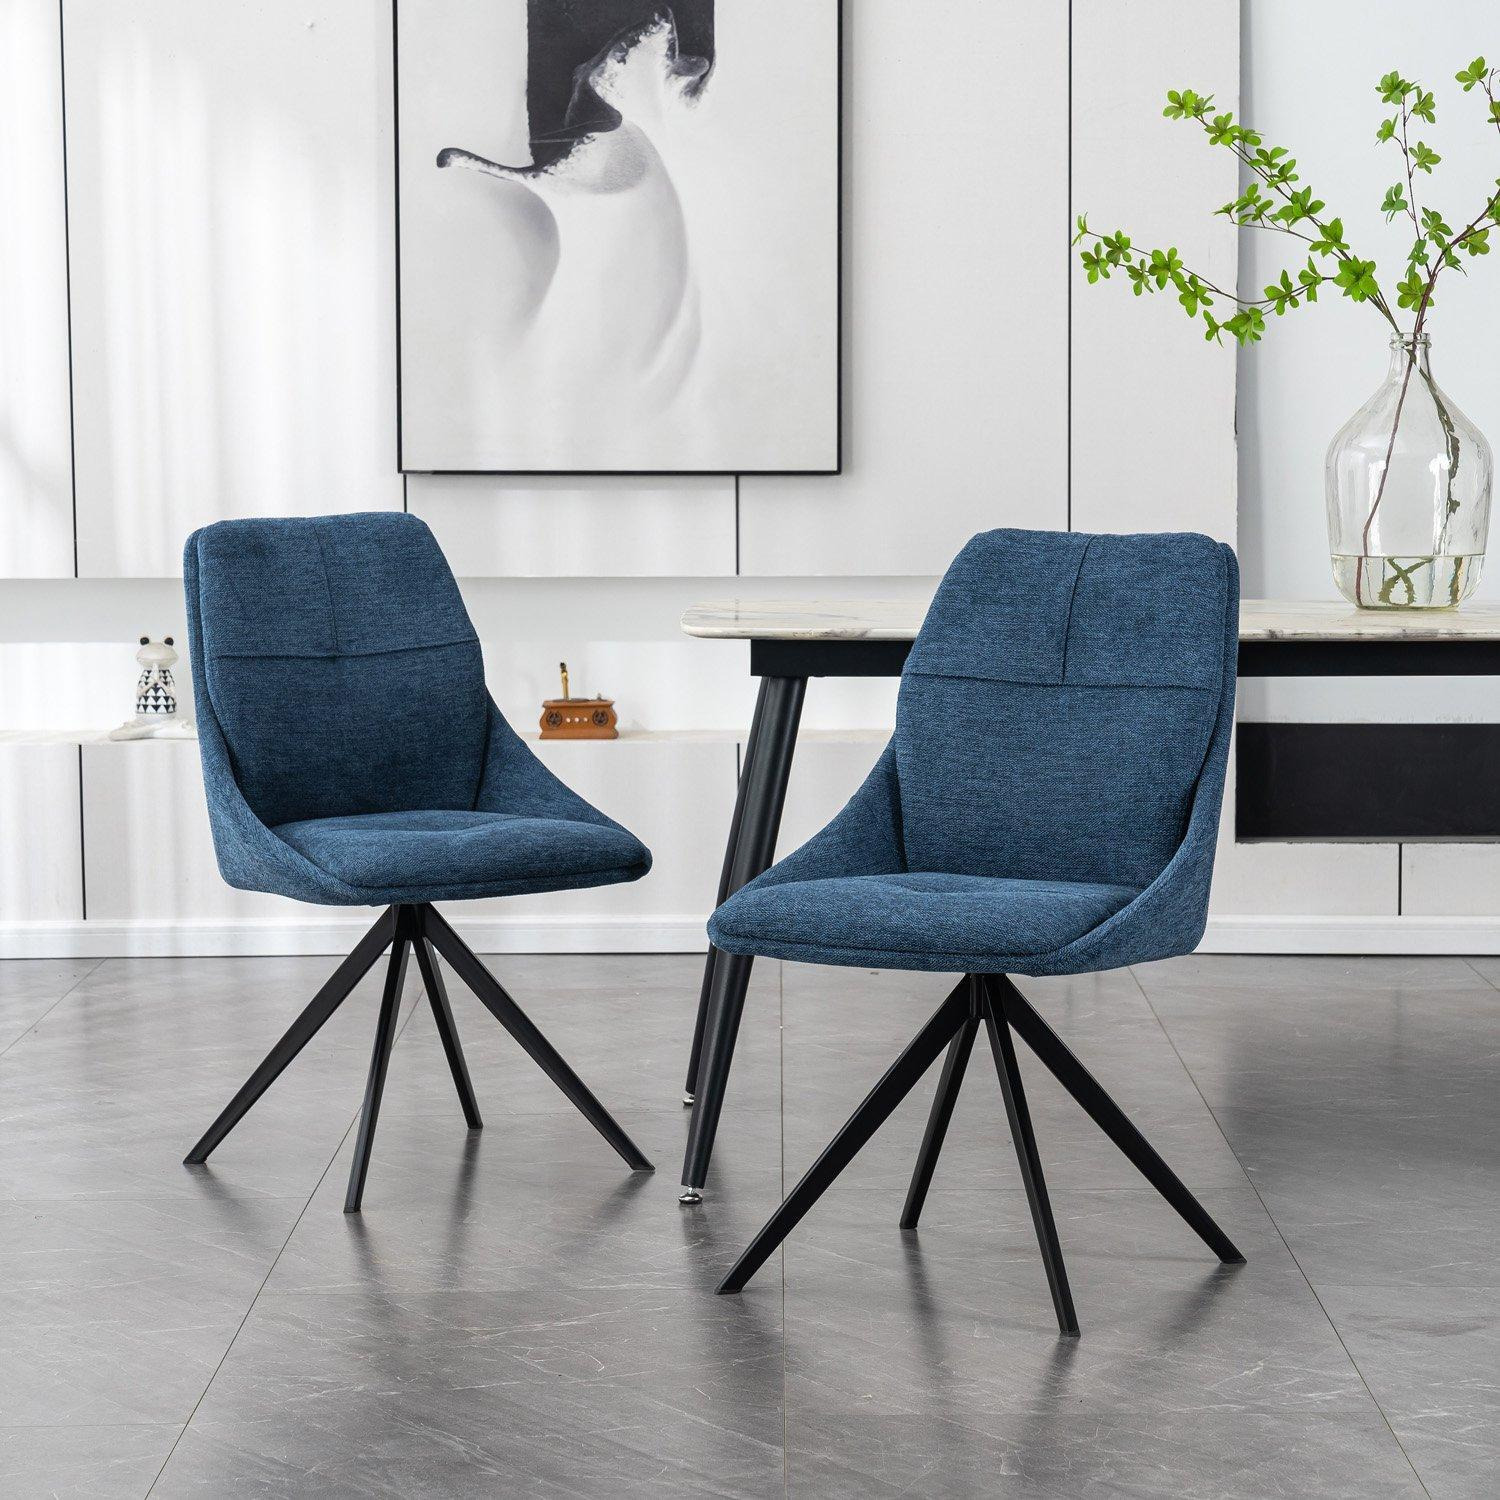 Set of 8 Luna Modern Fabric Dining Chair Padded Seat w Arms Metal Legs - image 1